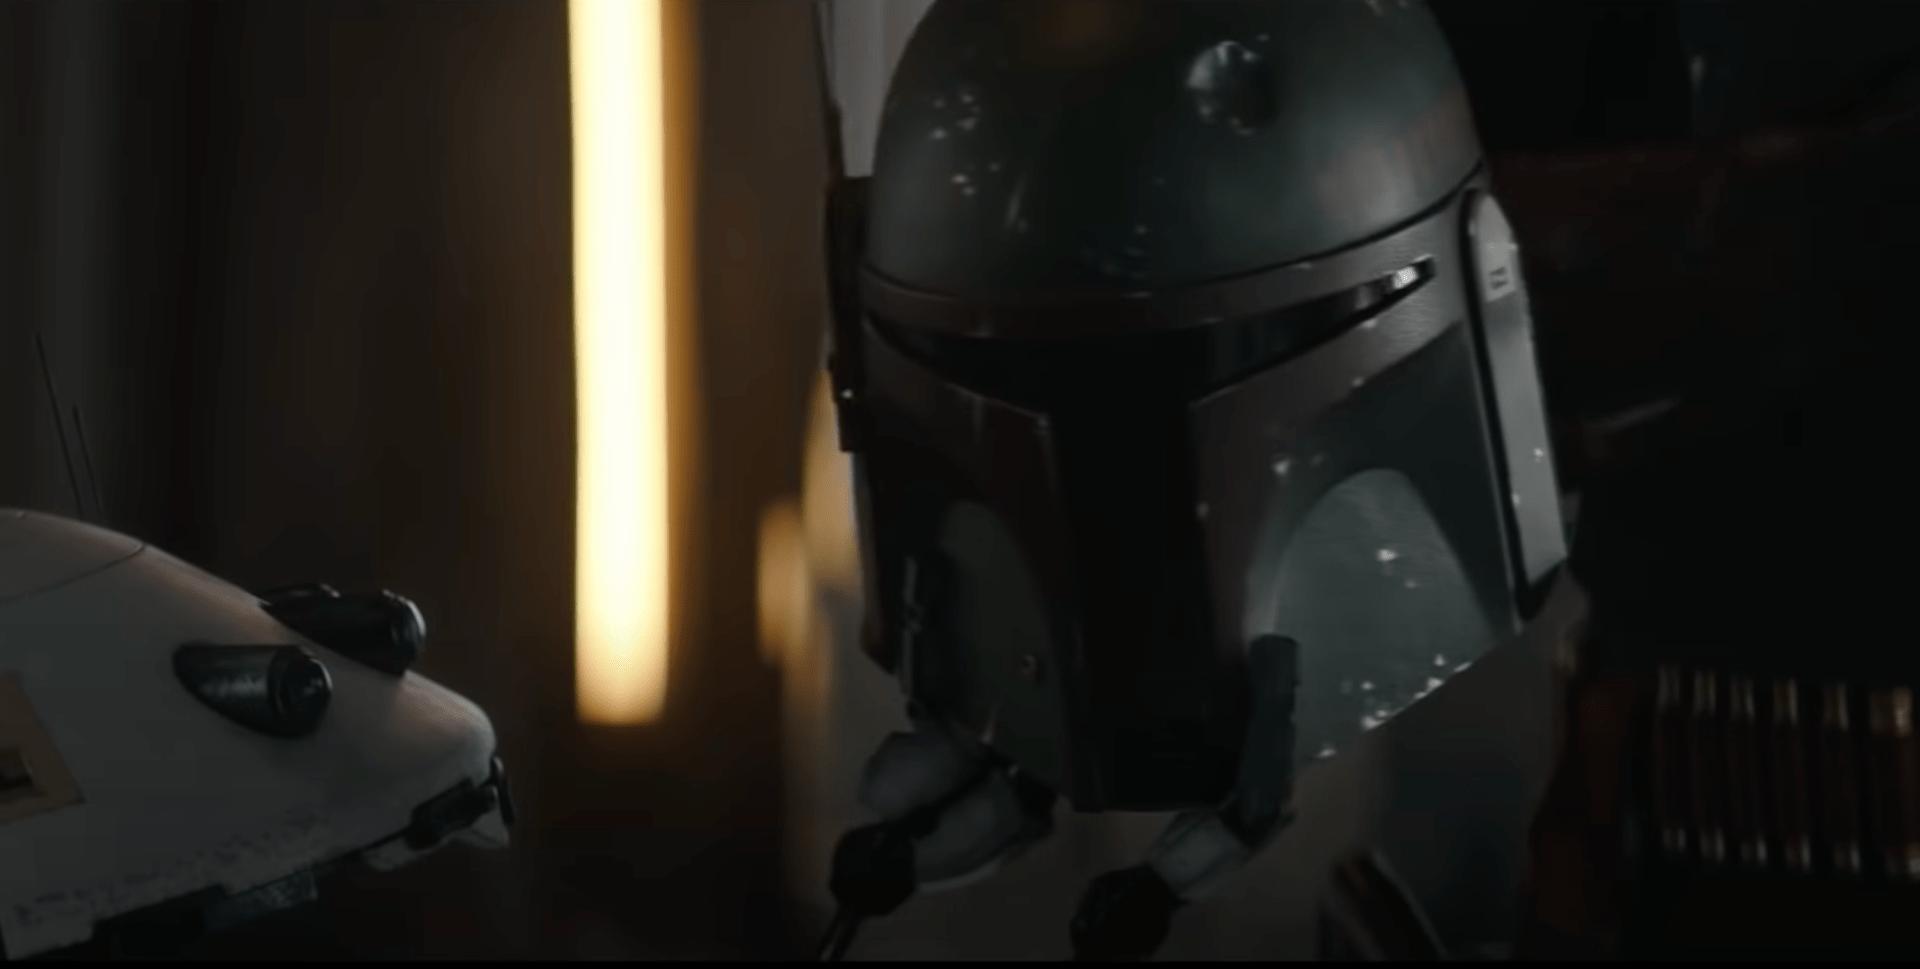 Watch new 'The Book of Boba Fett' trailer